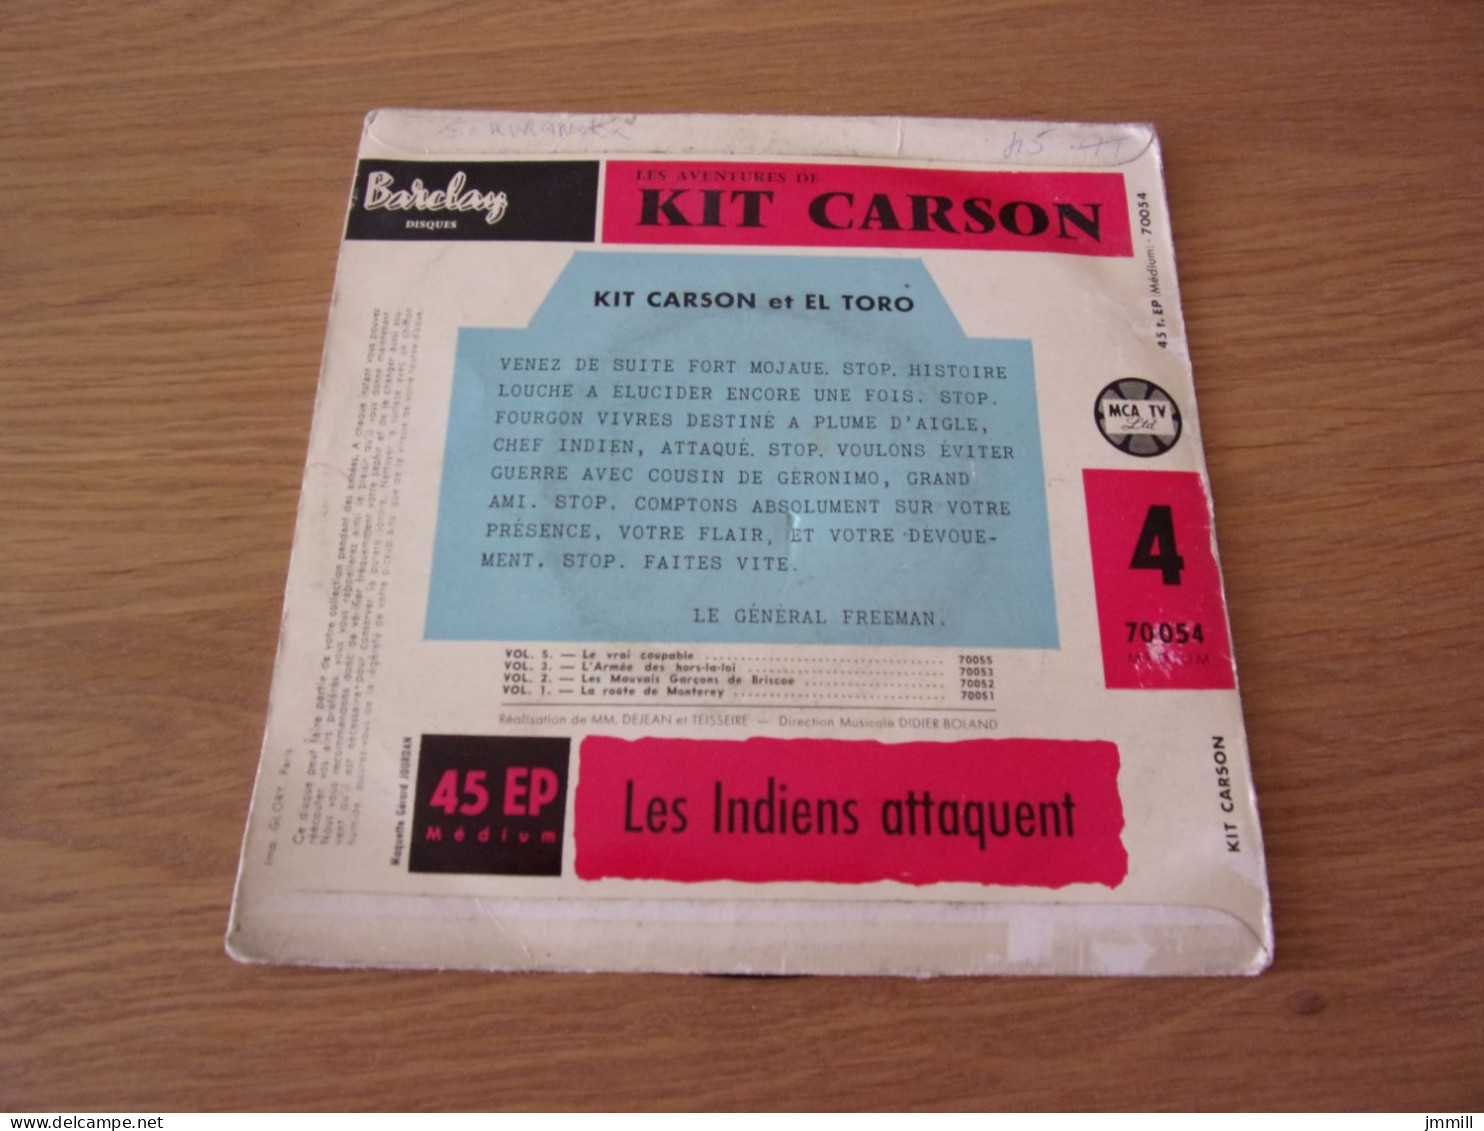 Kit Carson 4 Les Indiens Attaquent Disque 45 Tours Barclay - Records